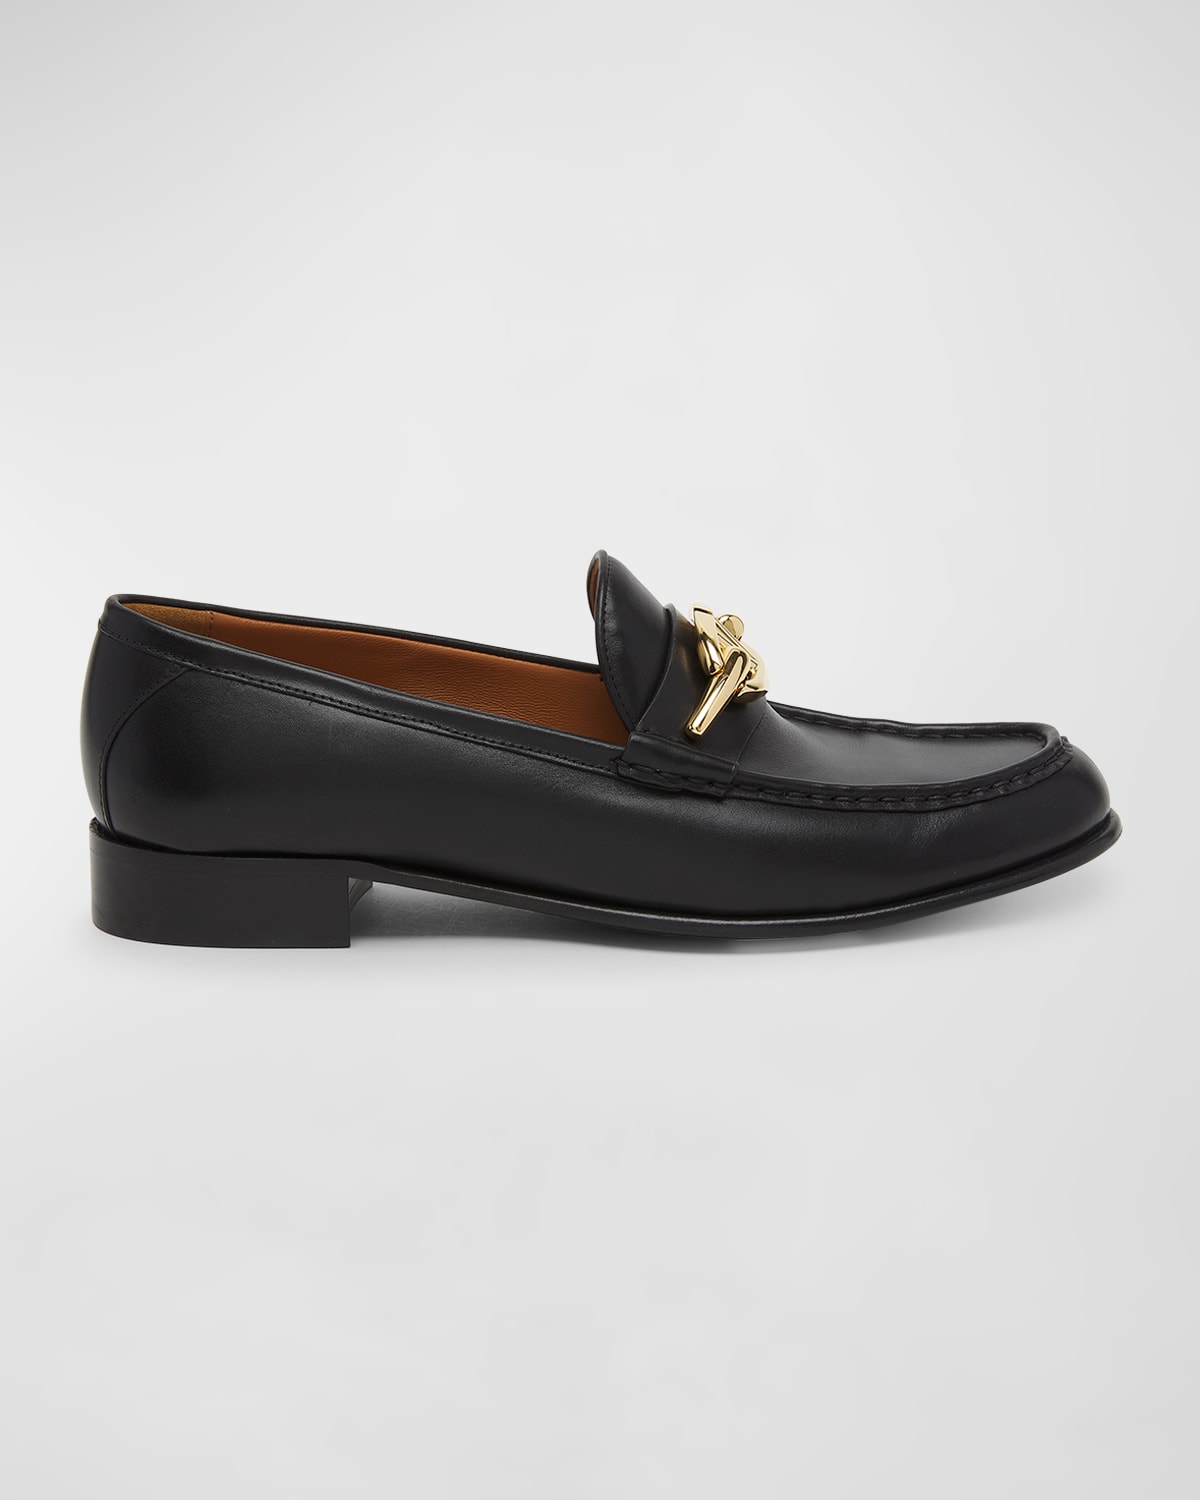 Gate VLogo Leather Loafers